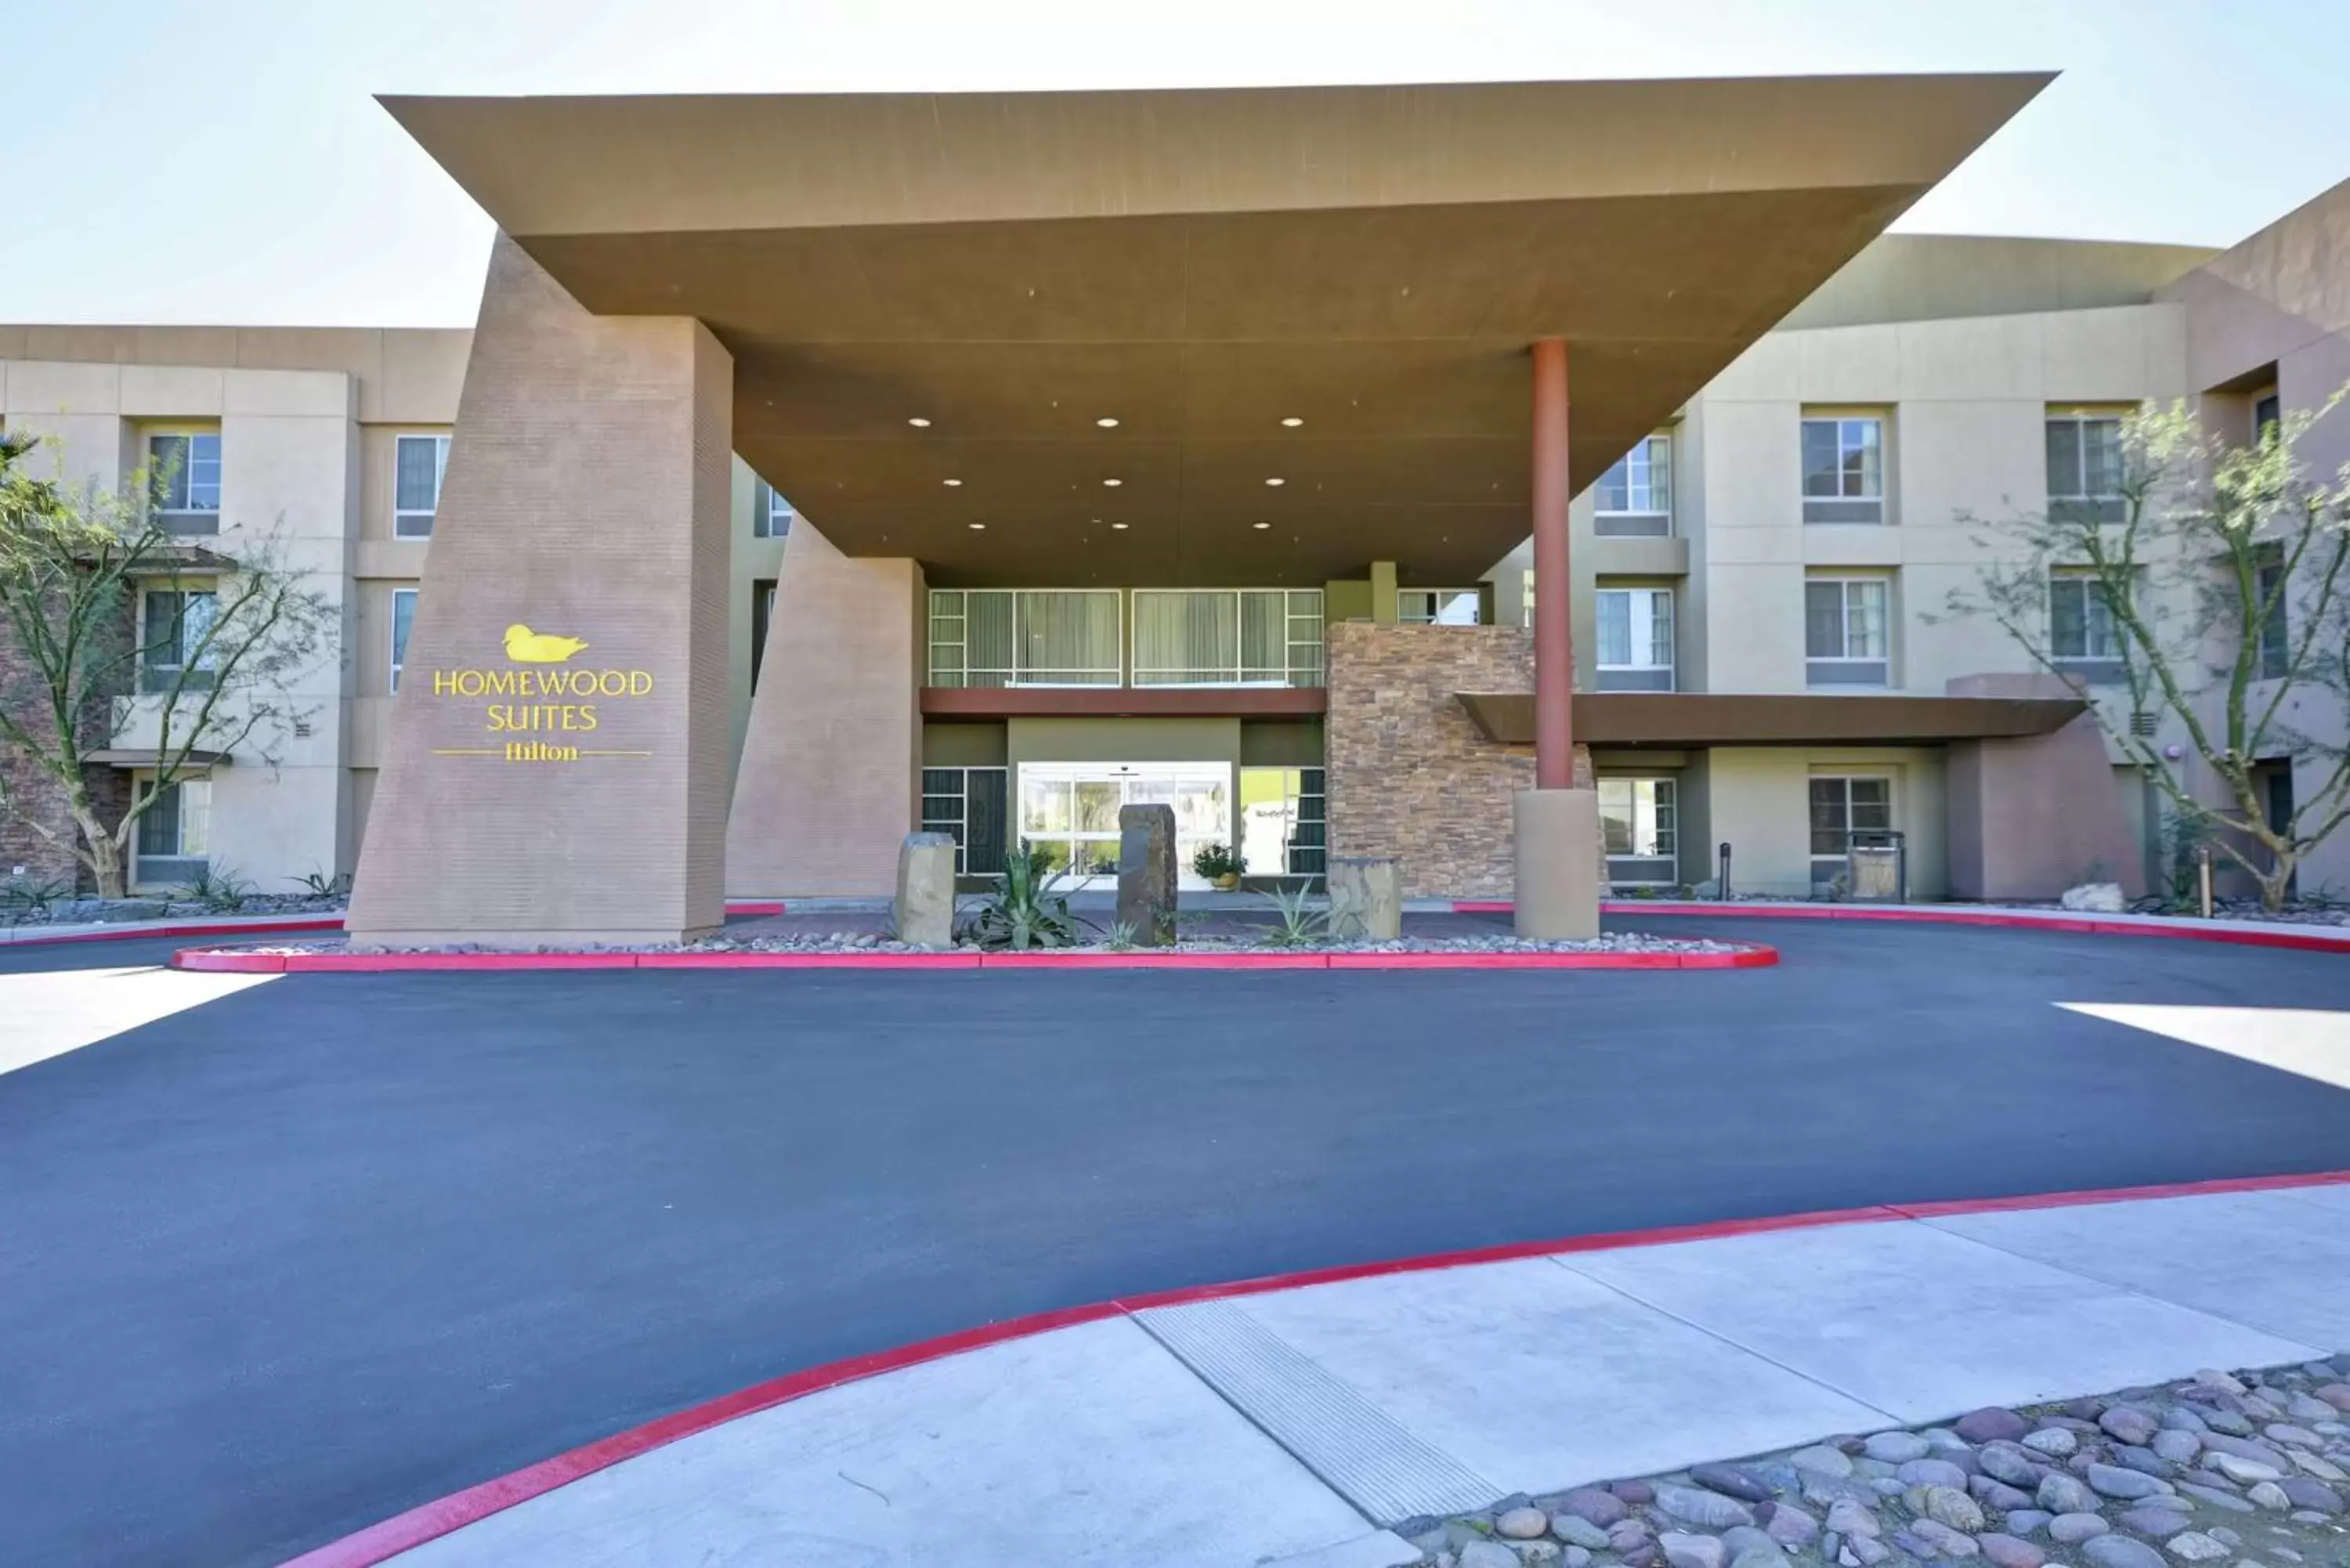 Property building in Homewood Suites by Hilton Palm Desert